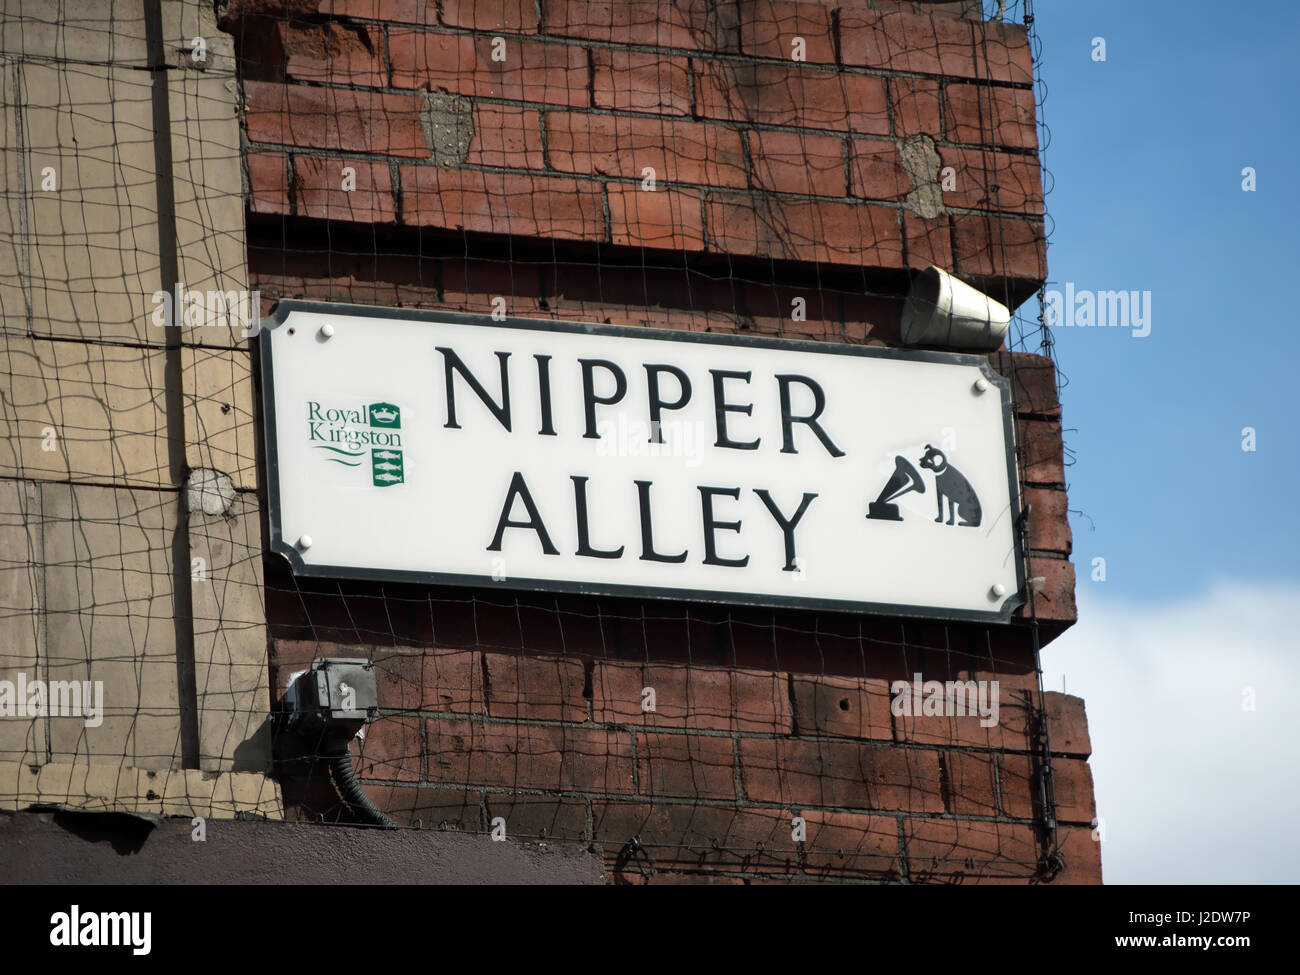 street name sign for nipper alley, named for the dog used in the logo of his masters voice, or hmv, record company, kingston, surrey, england Stock Photo